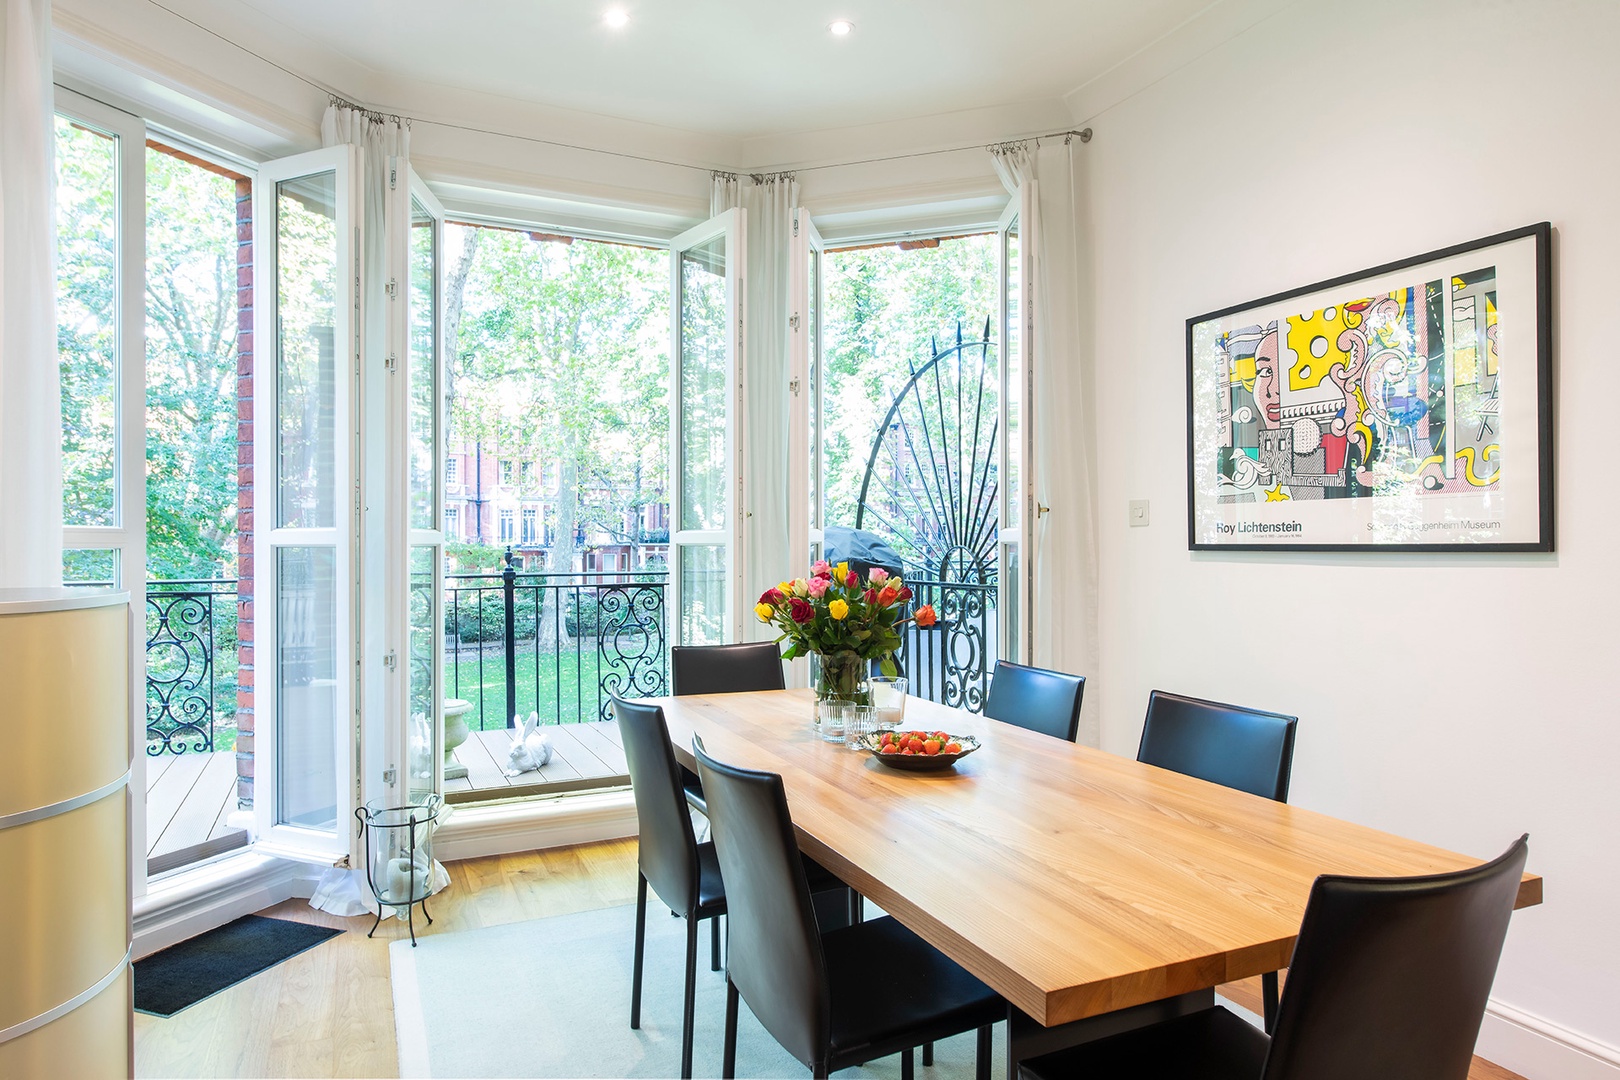 Beautiful dining area with views over private garden square and access to terrace.